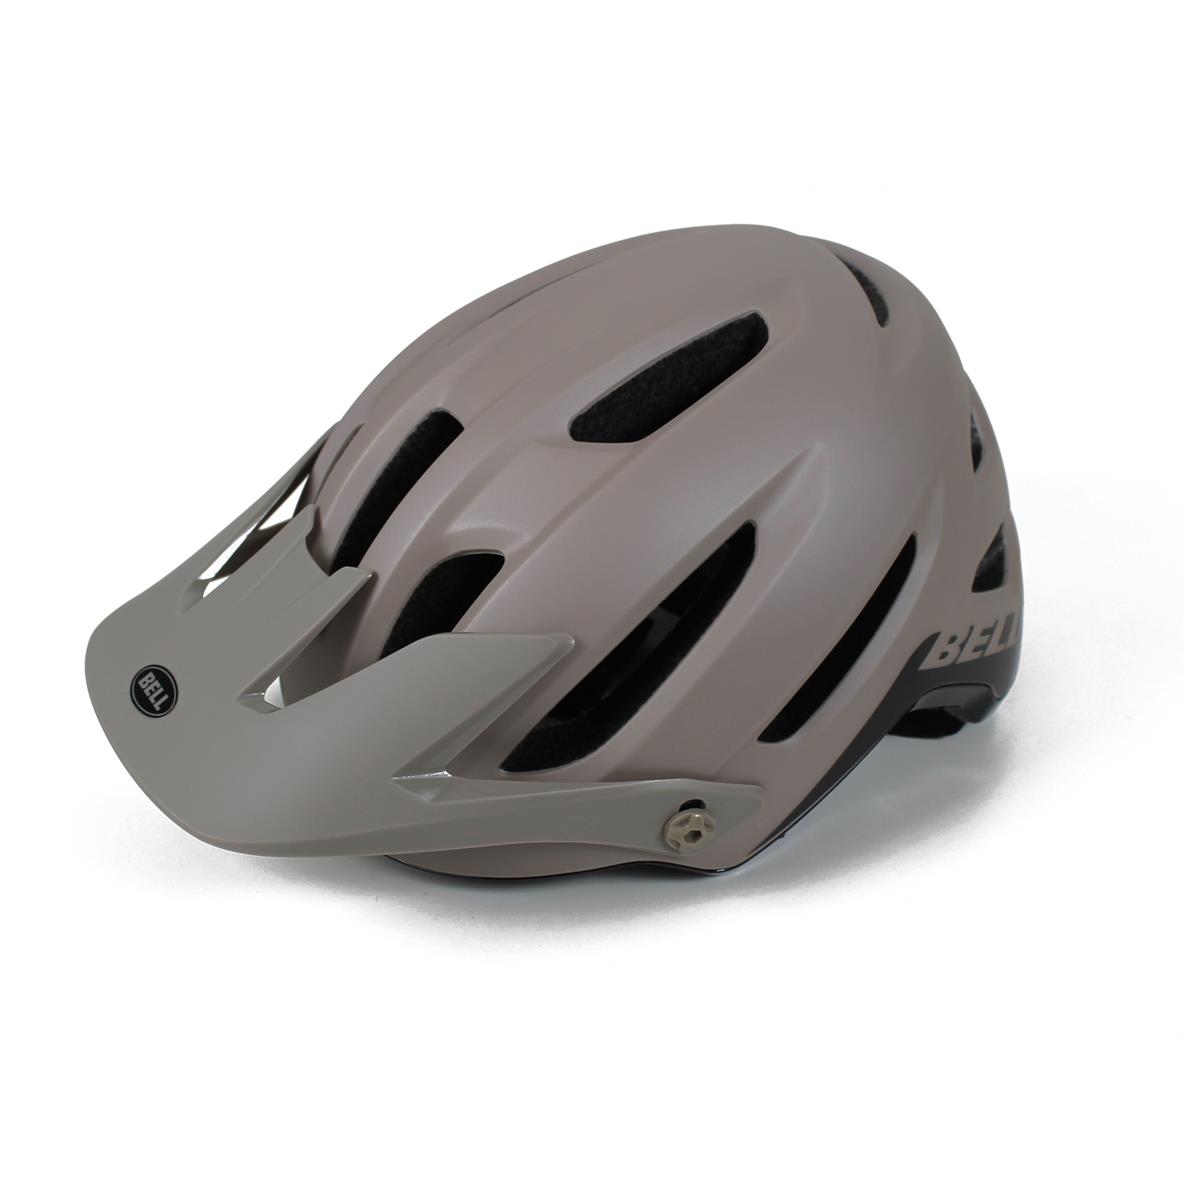 Helmet 4FORTY MIPS Sand size S (52-56cm)